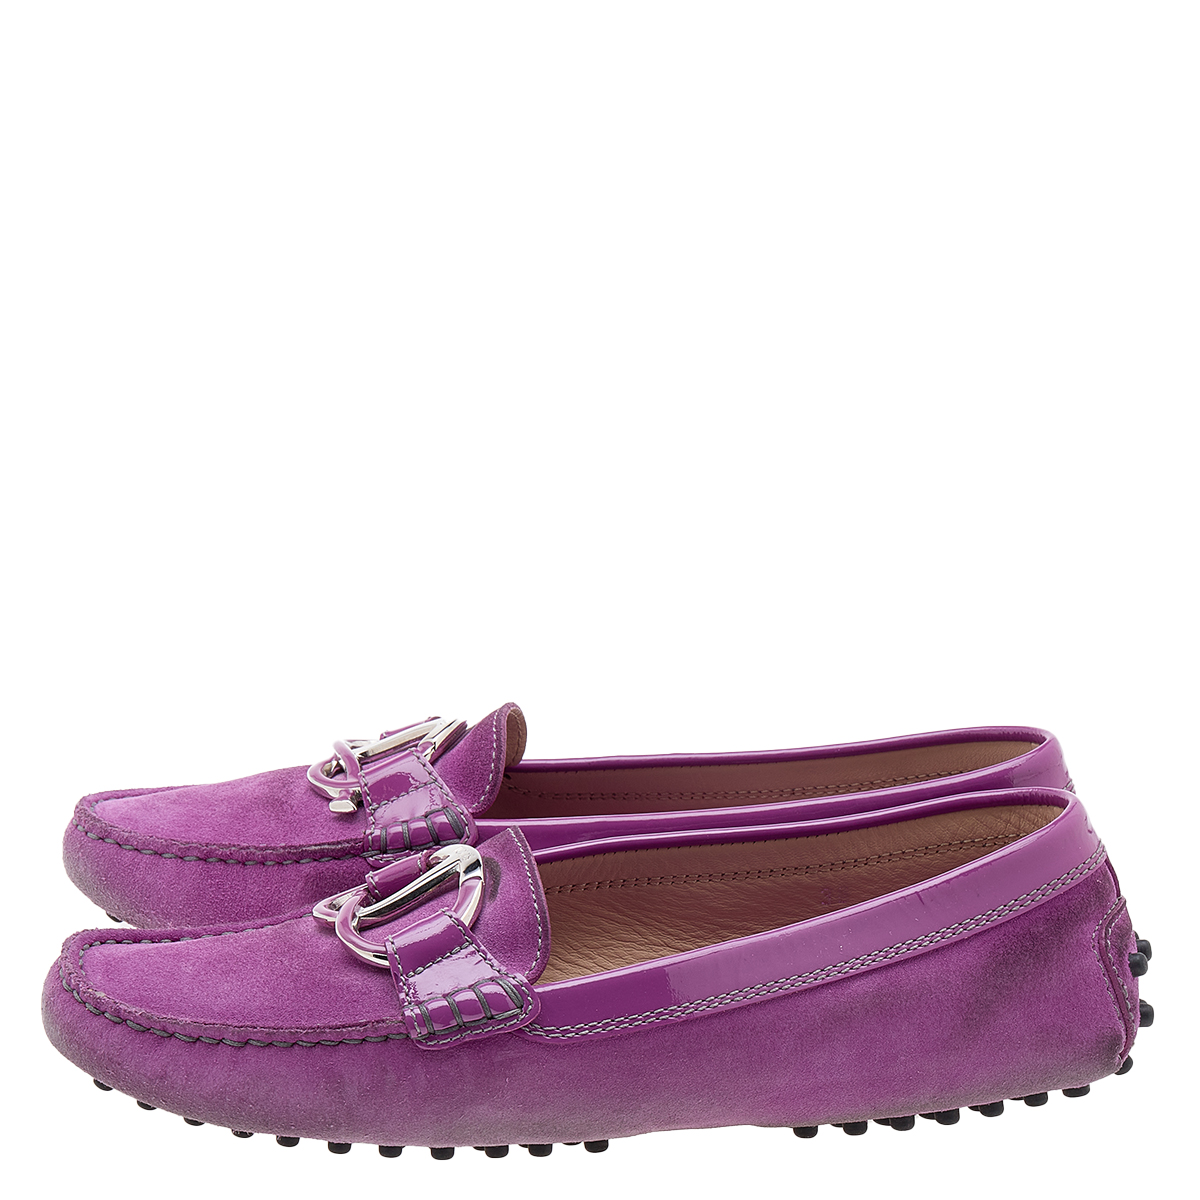 Tod's Purple Suede And Patent Leather Trim Embellished Slip On Loafers Size 38